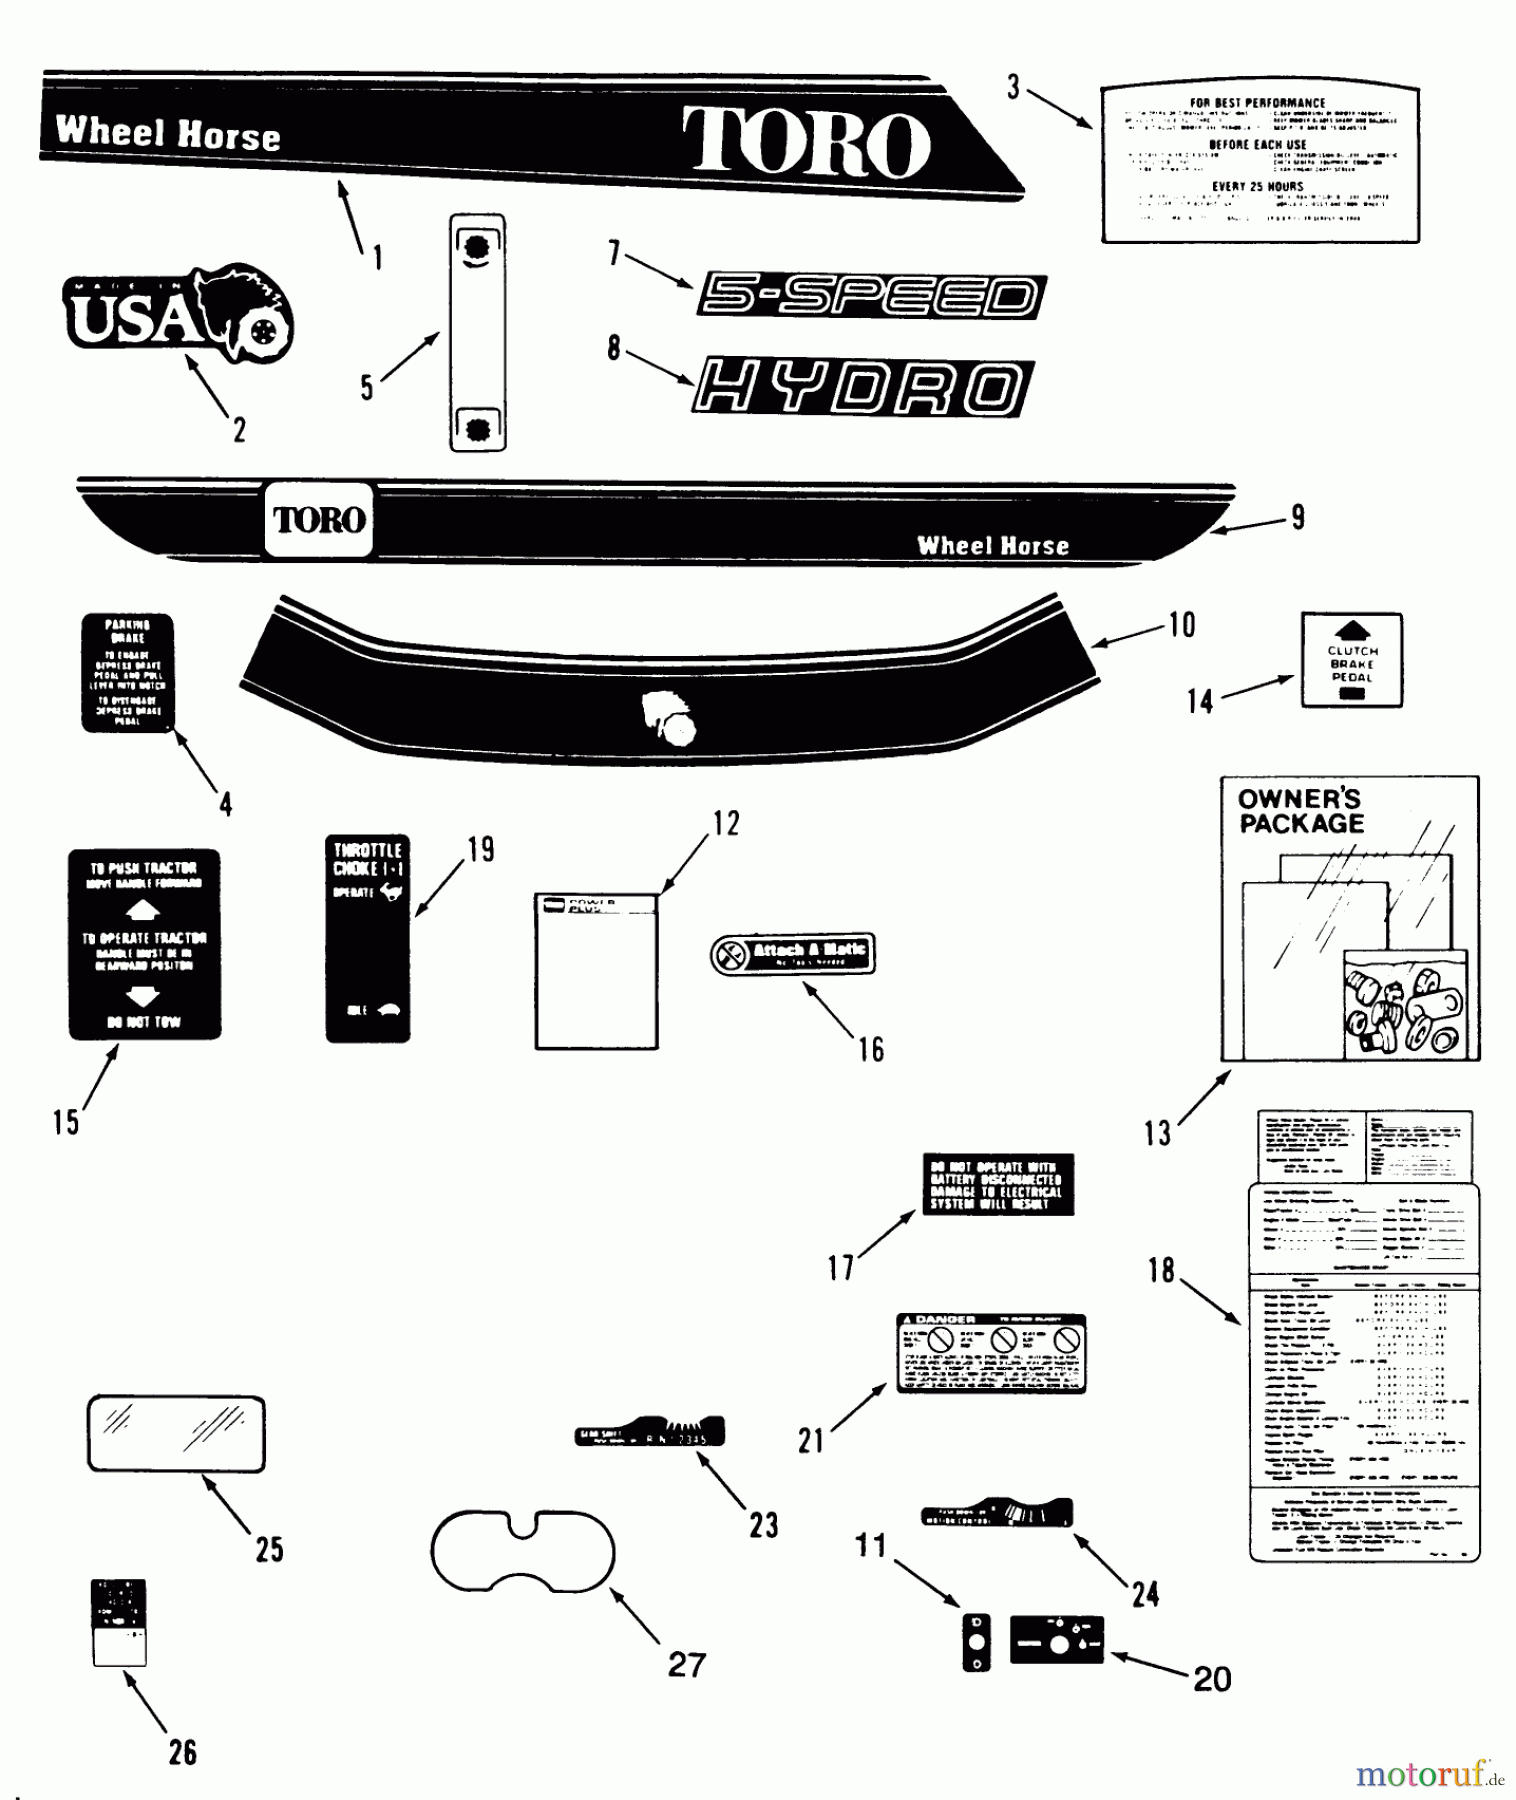  Toro Neu Mowers, Lawn & Garden Tractor Seite 1 32-12BEA3 (212-H) - Toro 212-H Tractor, 1991 (1000001-1999999) DECAL & MISCELLANEOUS PARTS ASSEMBLY